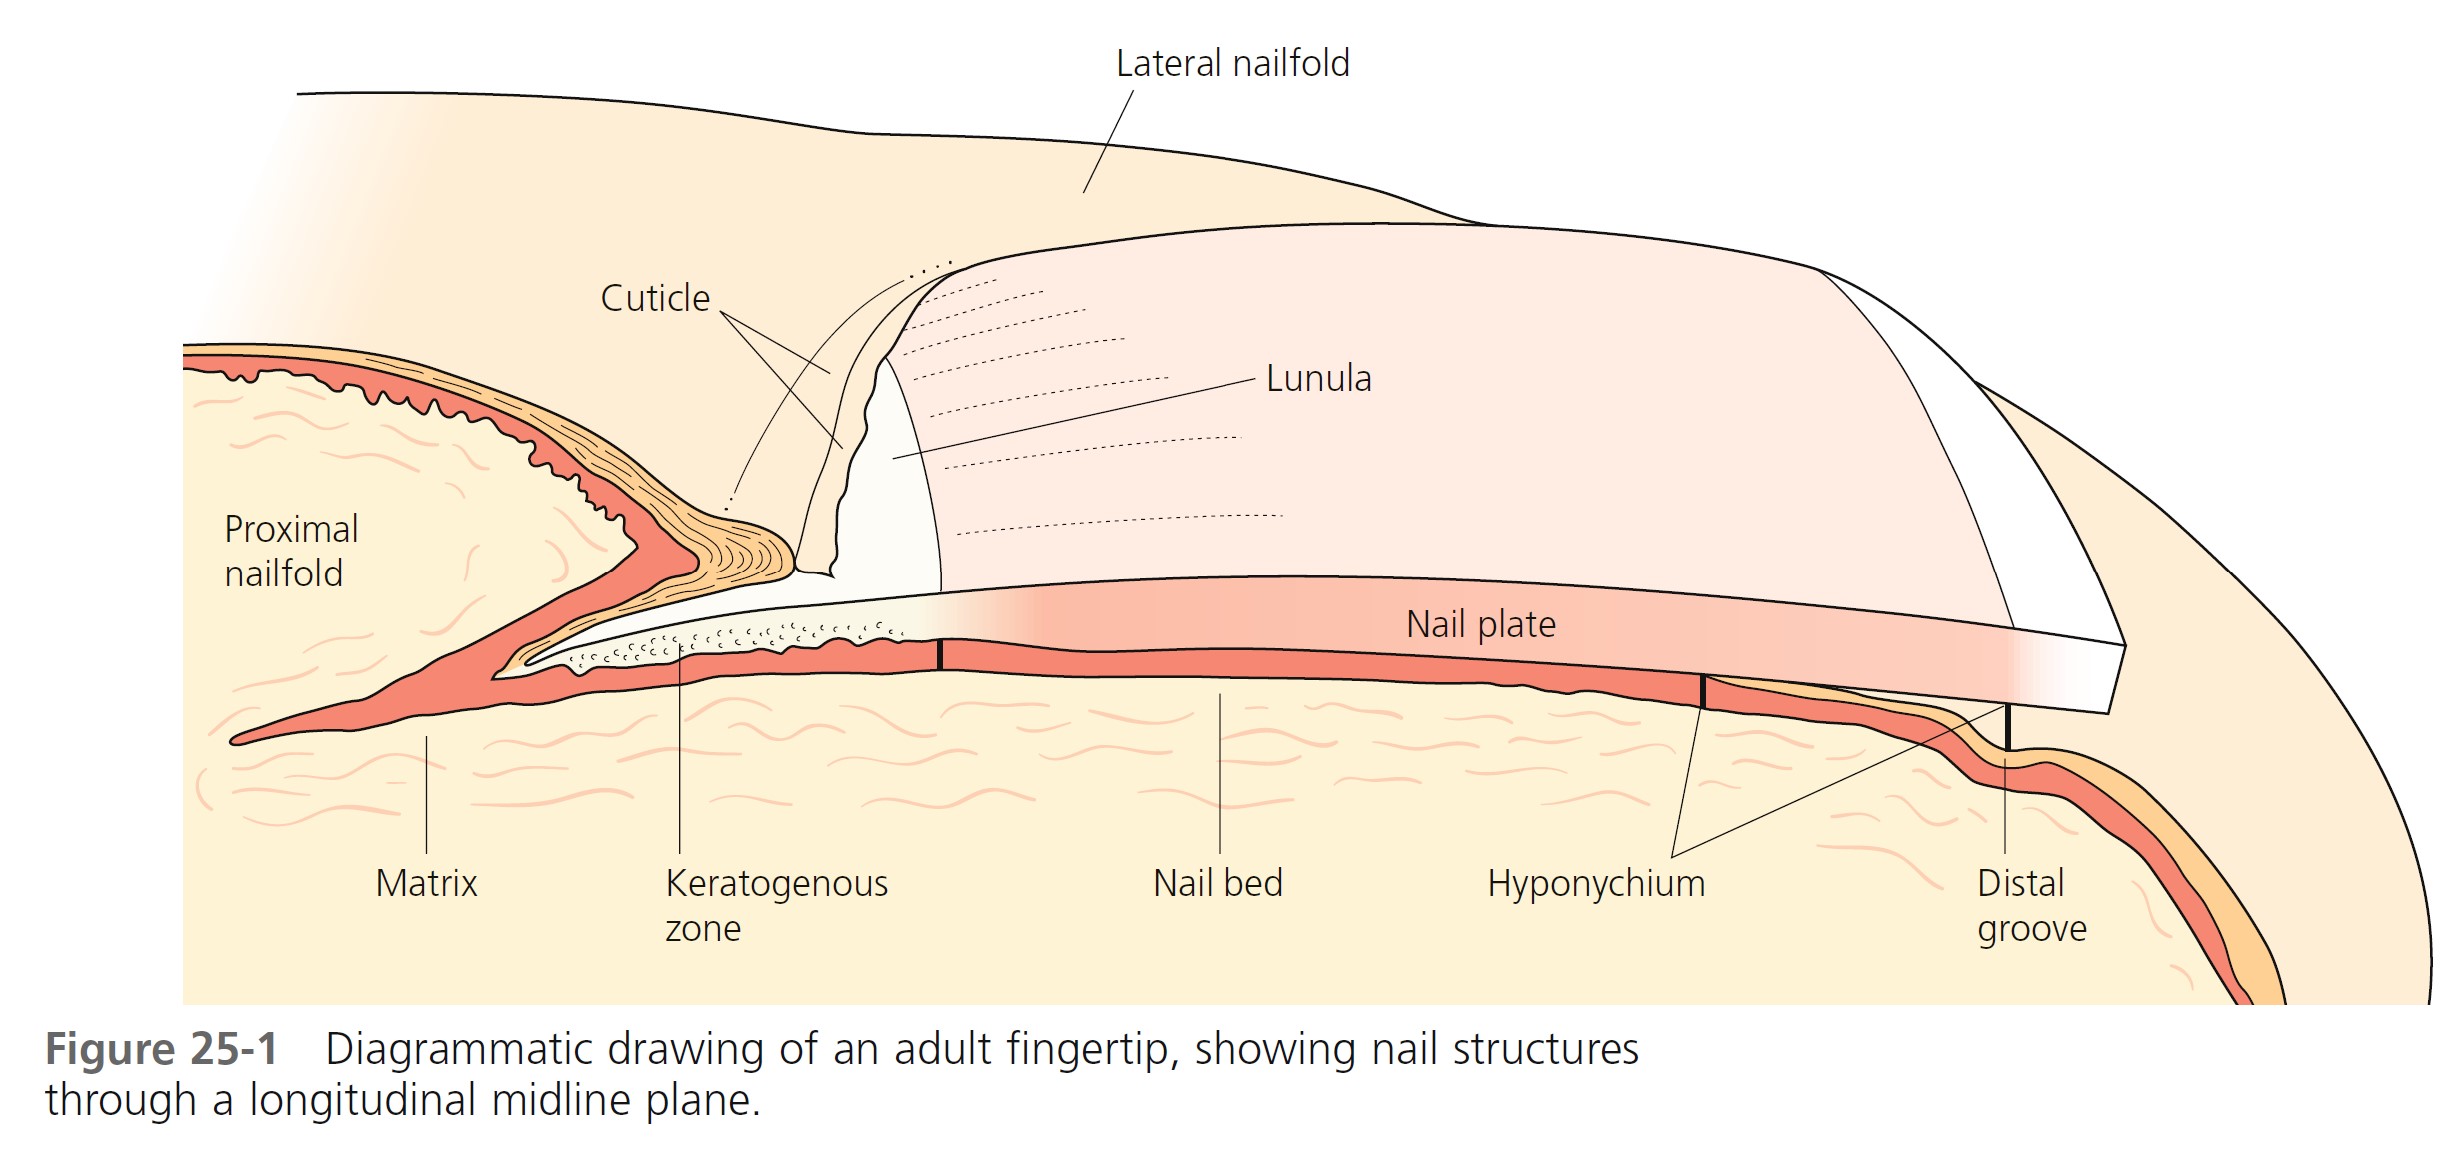 Nail Plate - Appearance, Function and Pictures